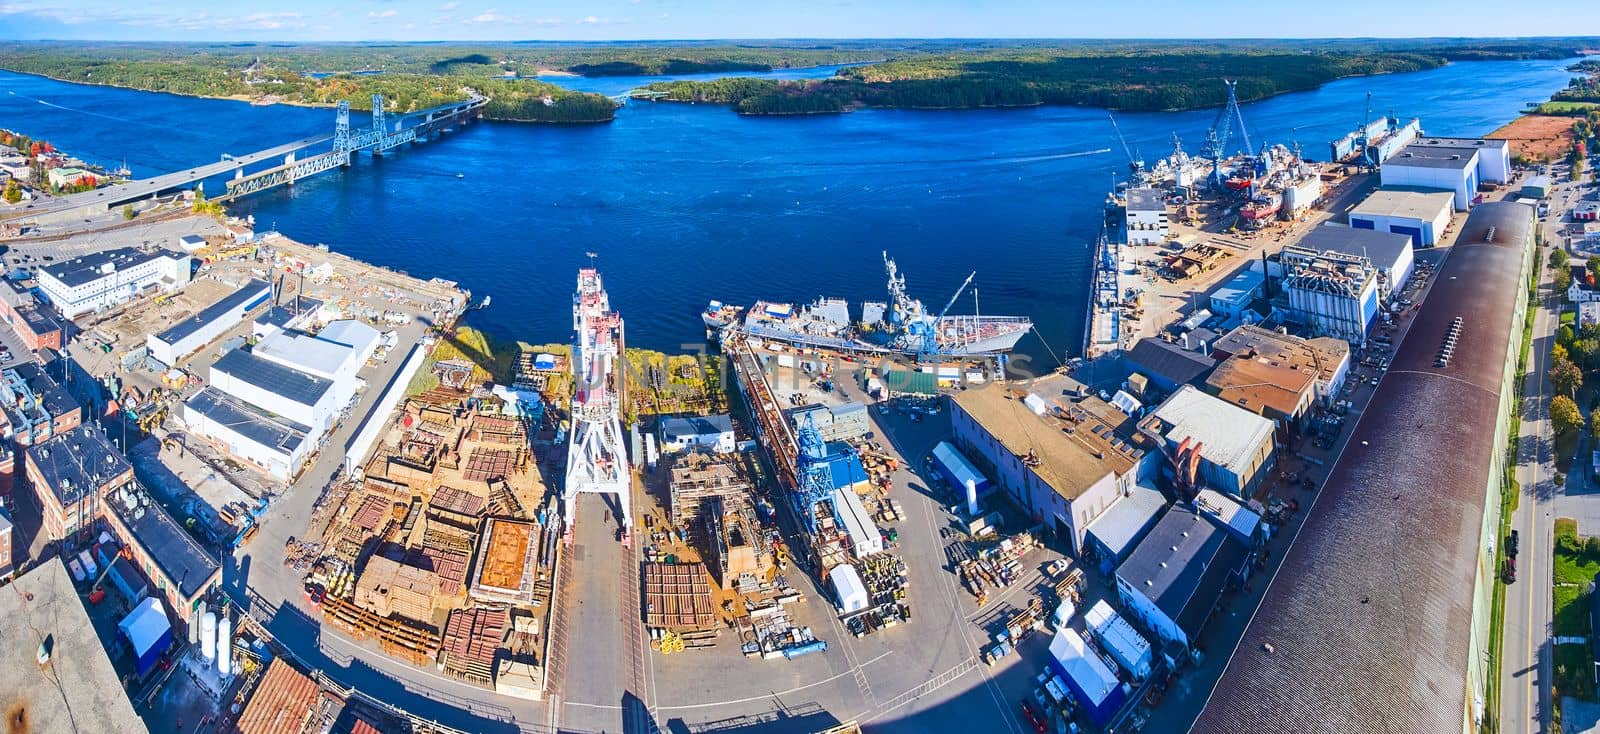 Panorama aerial over shipyard making military ships on river of Maine by njproductions